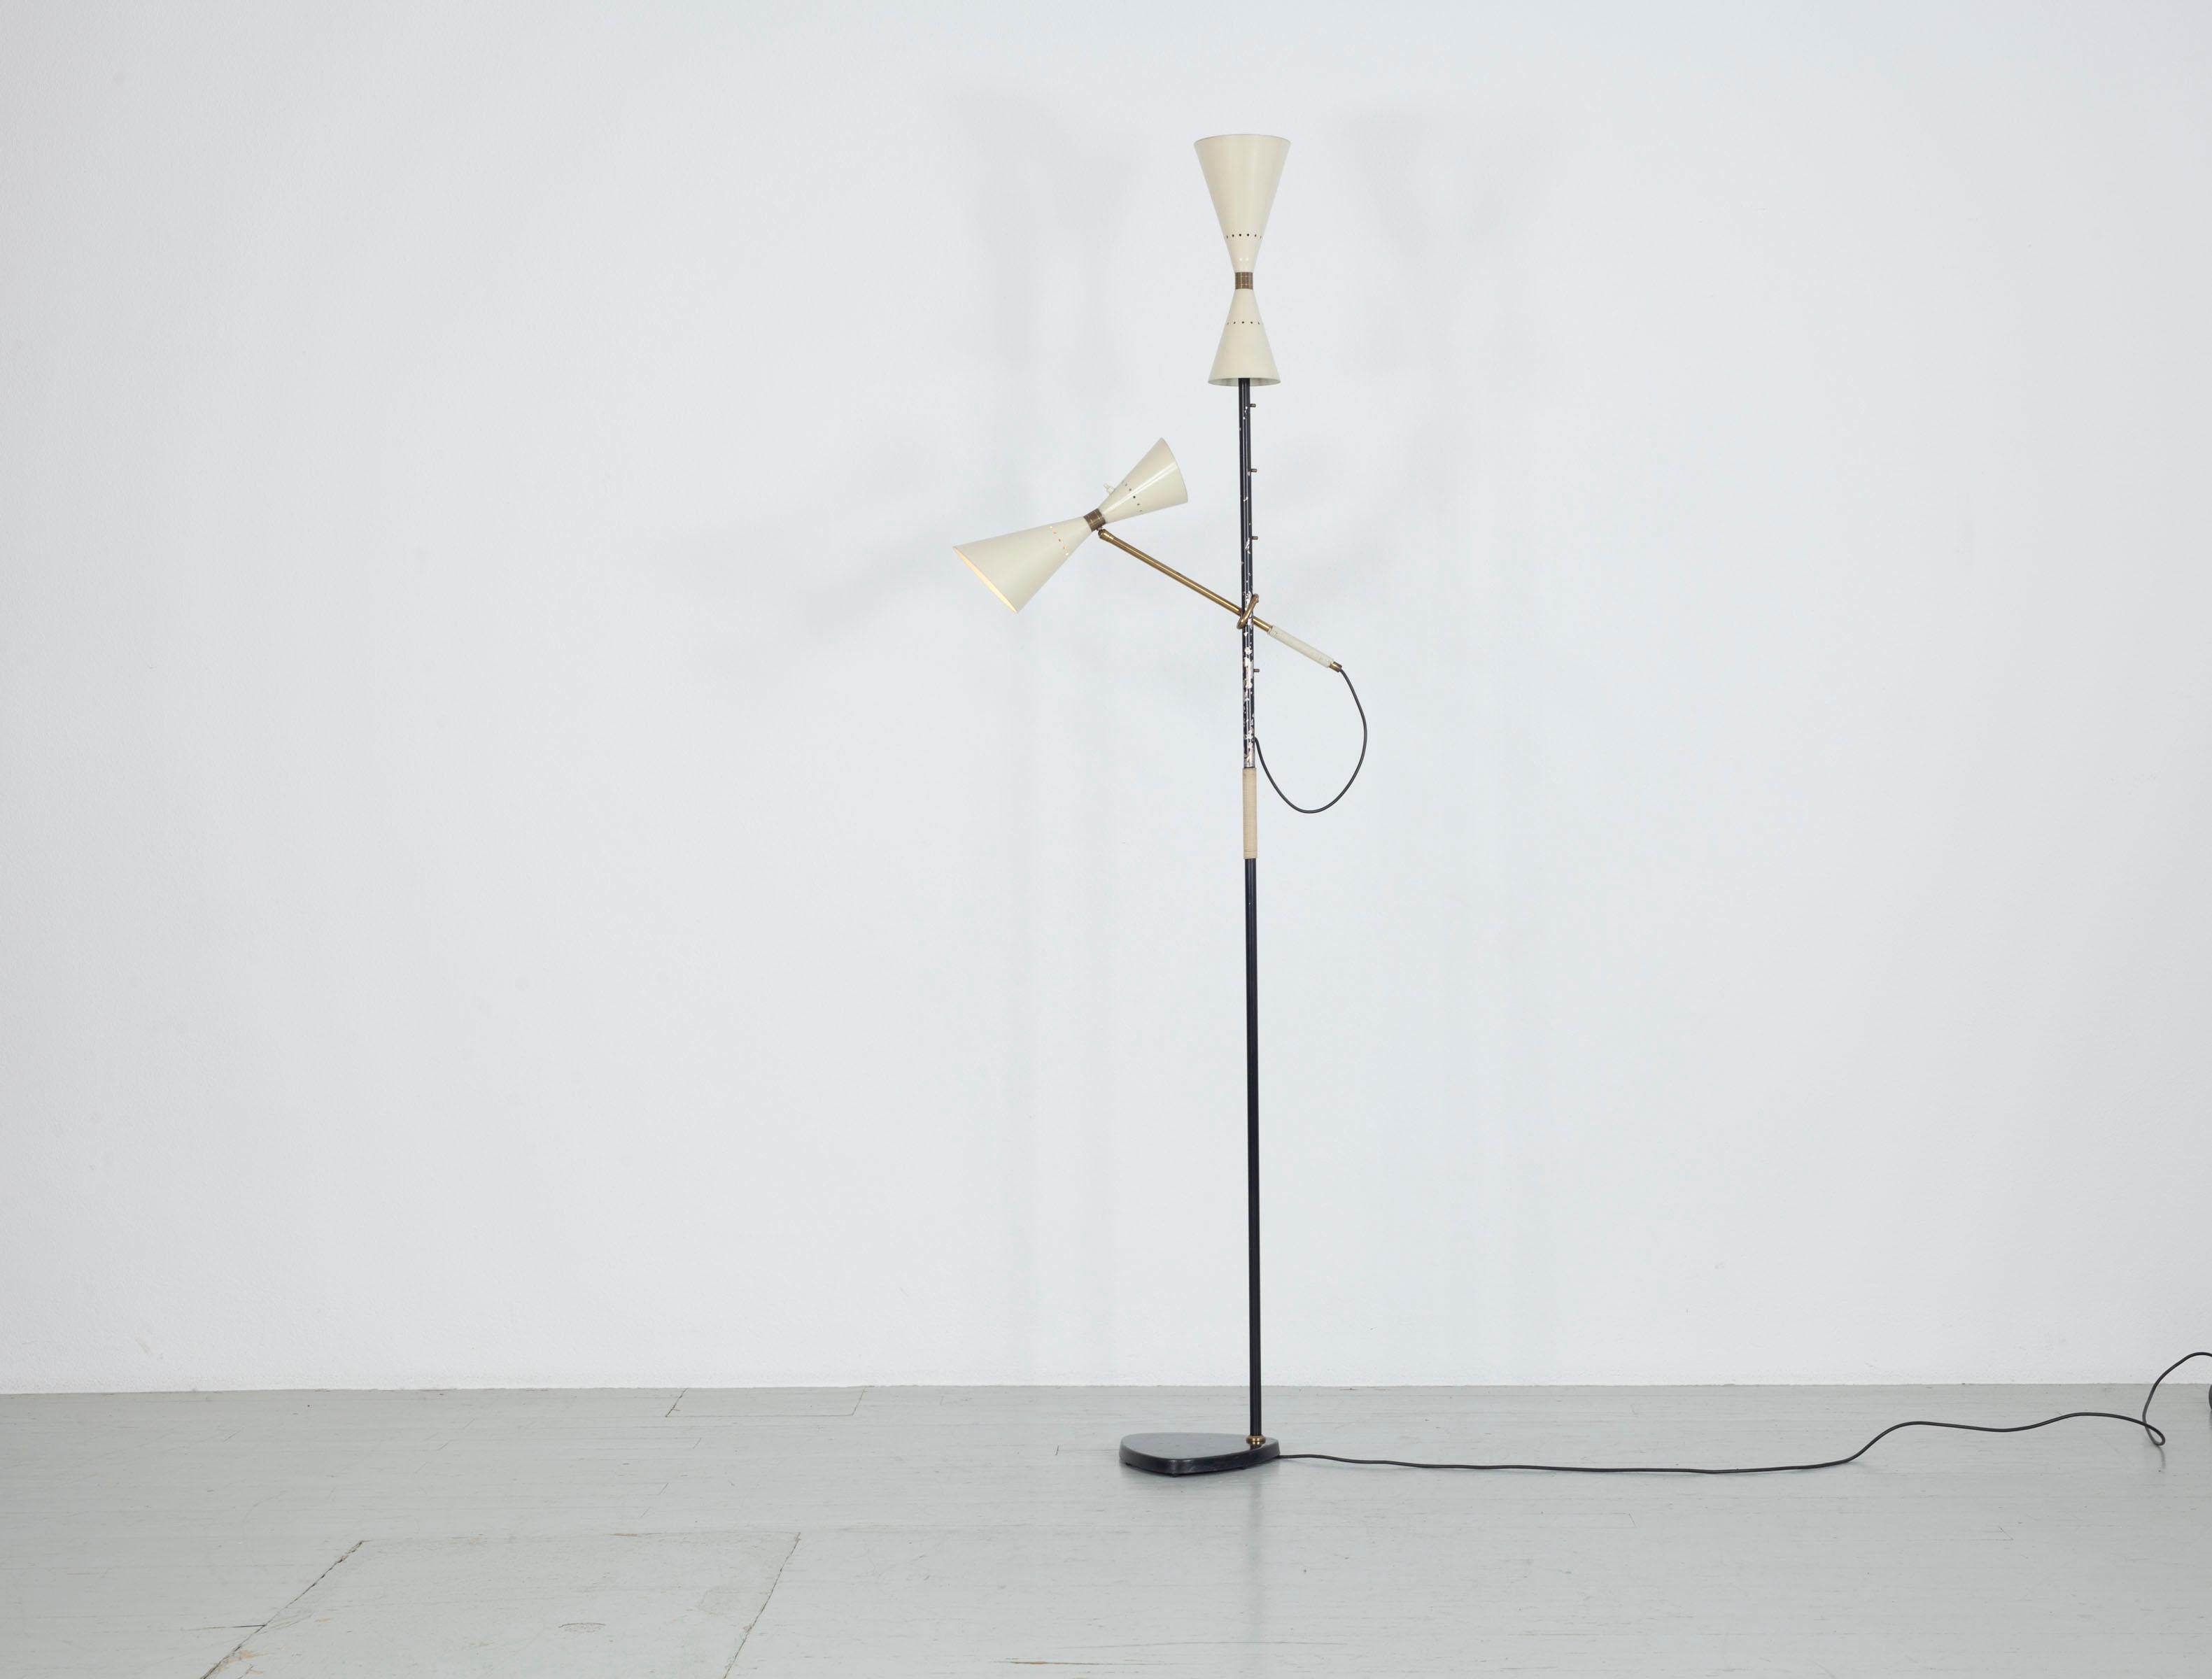 Floor Lamp - Design by J.T. Kalmar, manufactured by Kalmar, Vienna, 1950s. This lamp has an adjustable, lacquered metal shade and uplight. 

Feel free to contact us for more detailed pictures.